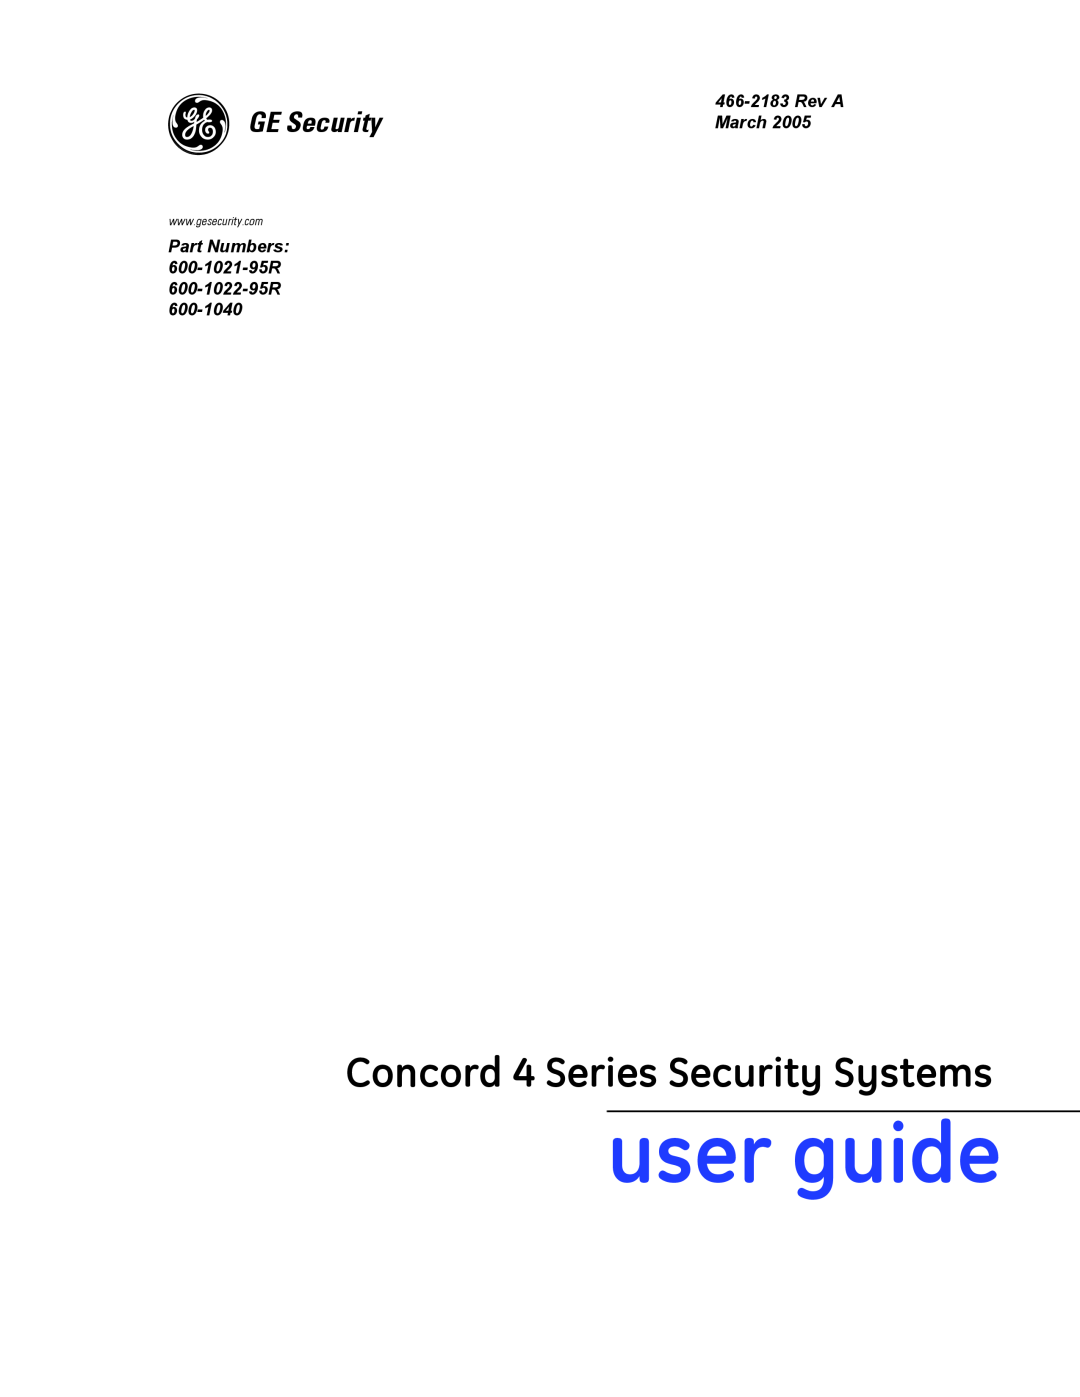 GE manual user guide, Concord 4 Series Security Systems, g GE Security, 466-2183Rev A March 